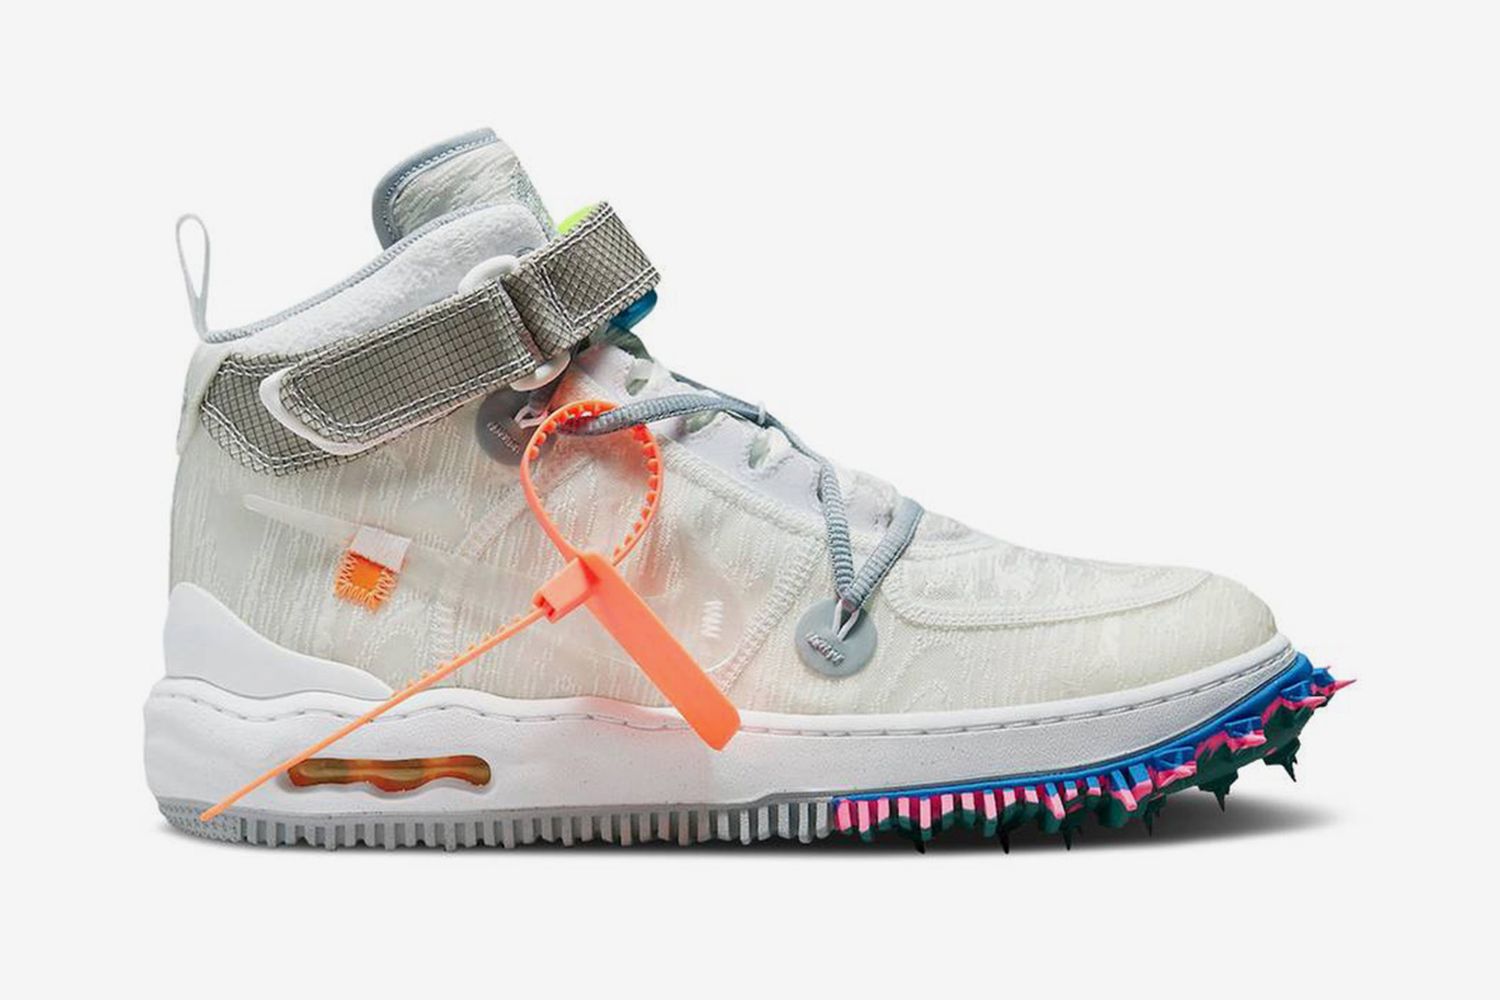 Nike x Off-White™ Air Force 1 Mid: Where to Buy & Resale Prices